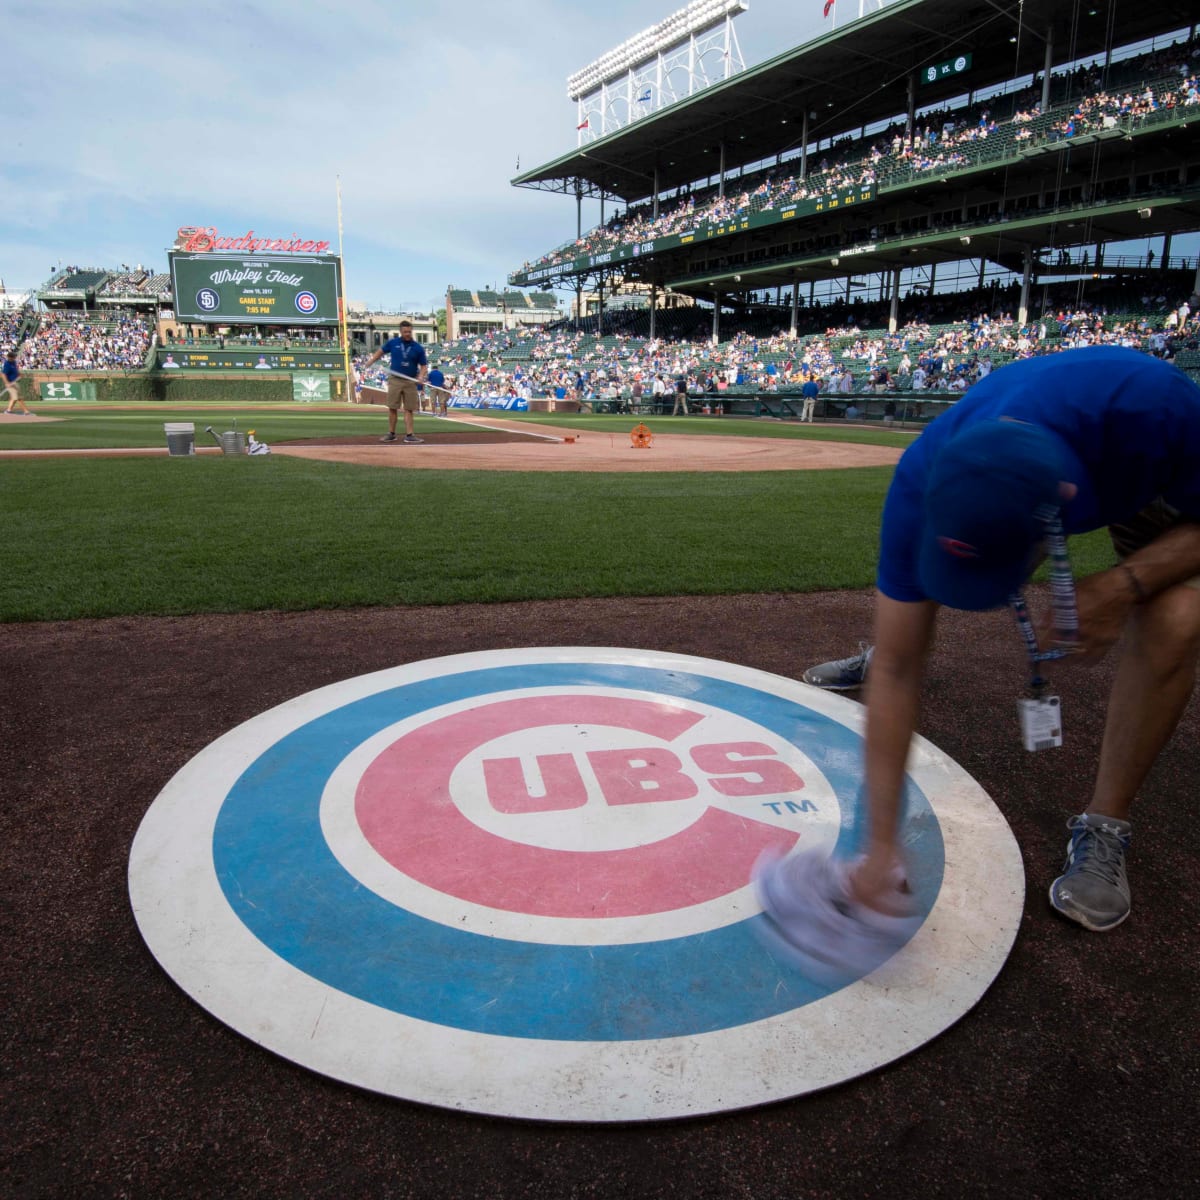 South Bend Outfield a Glimpse of the Cubs' Future